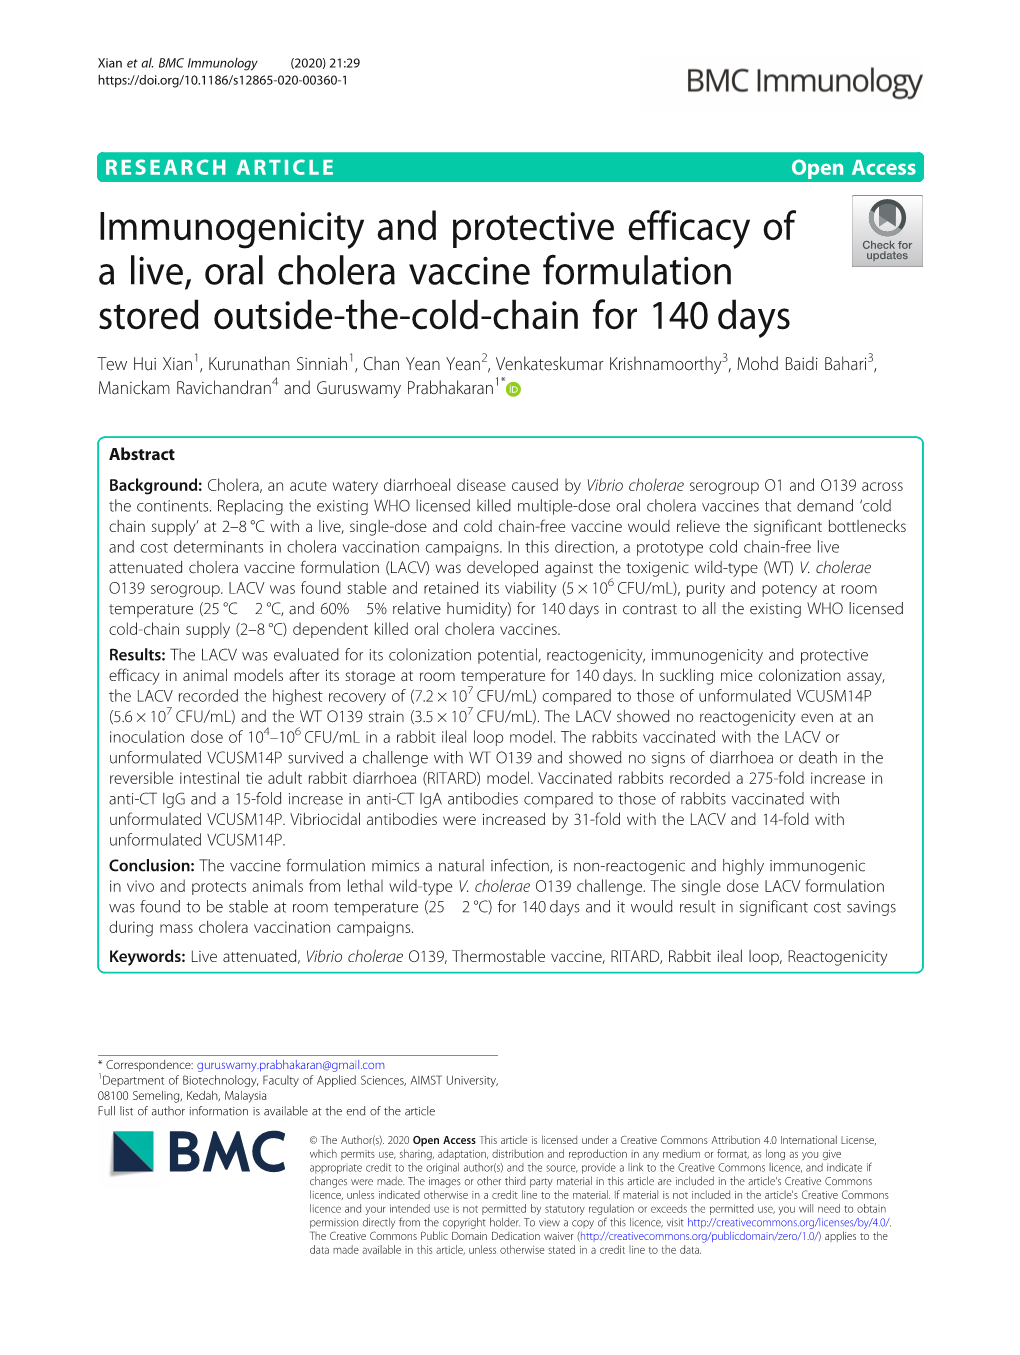 Immunogenicity and Protective Efficacy of a Live, Oral Cholera